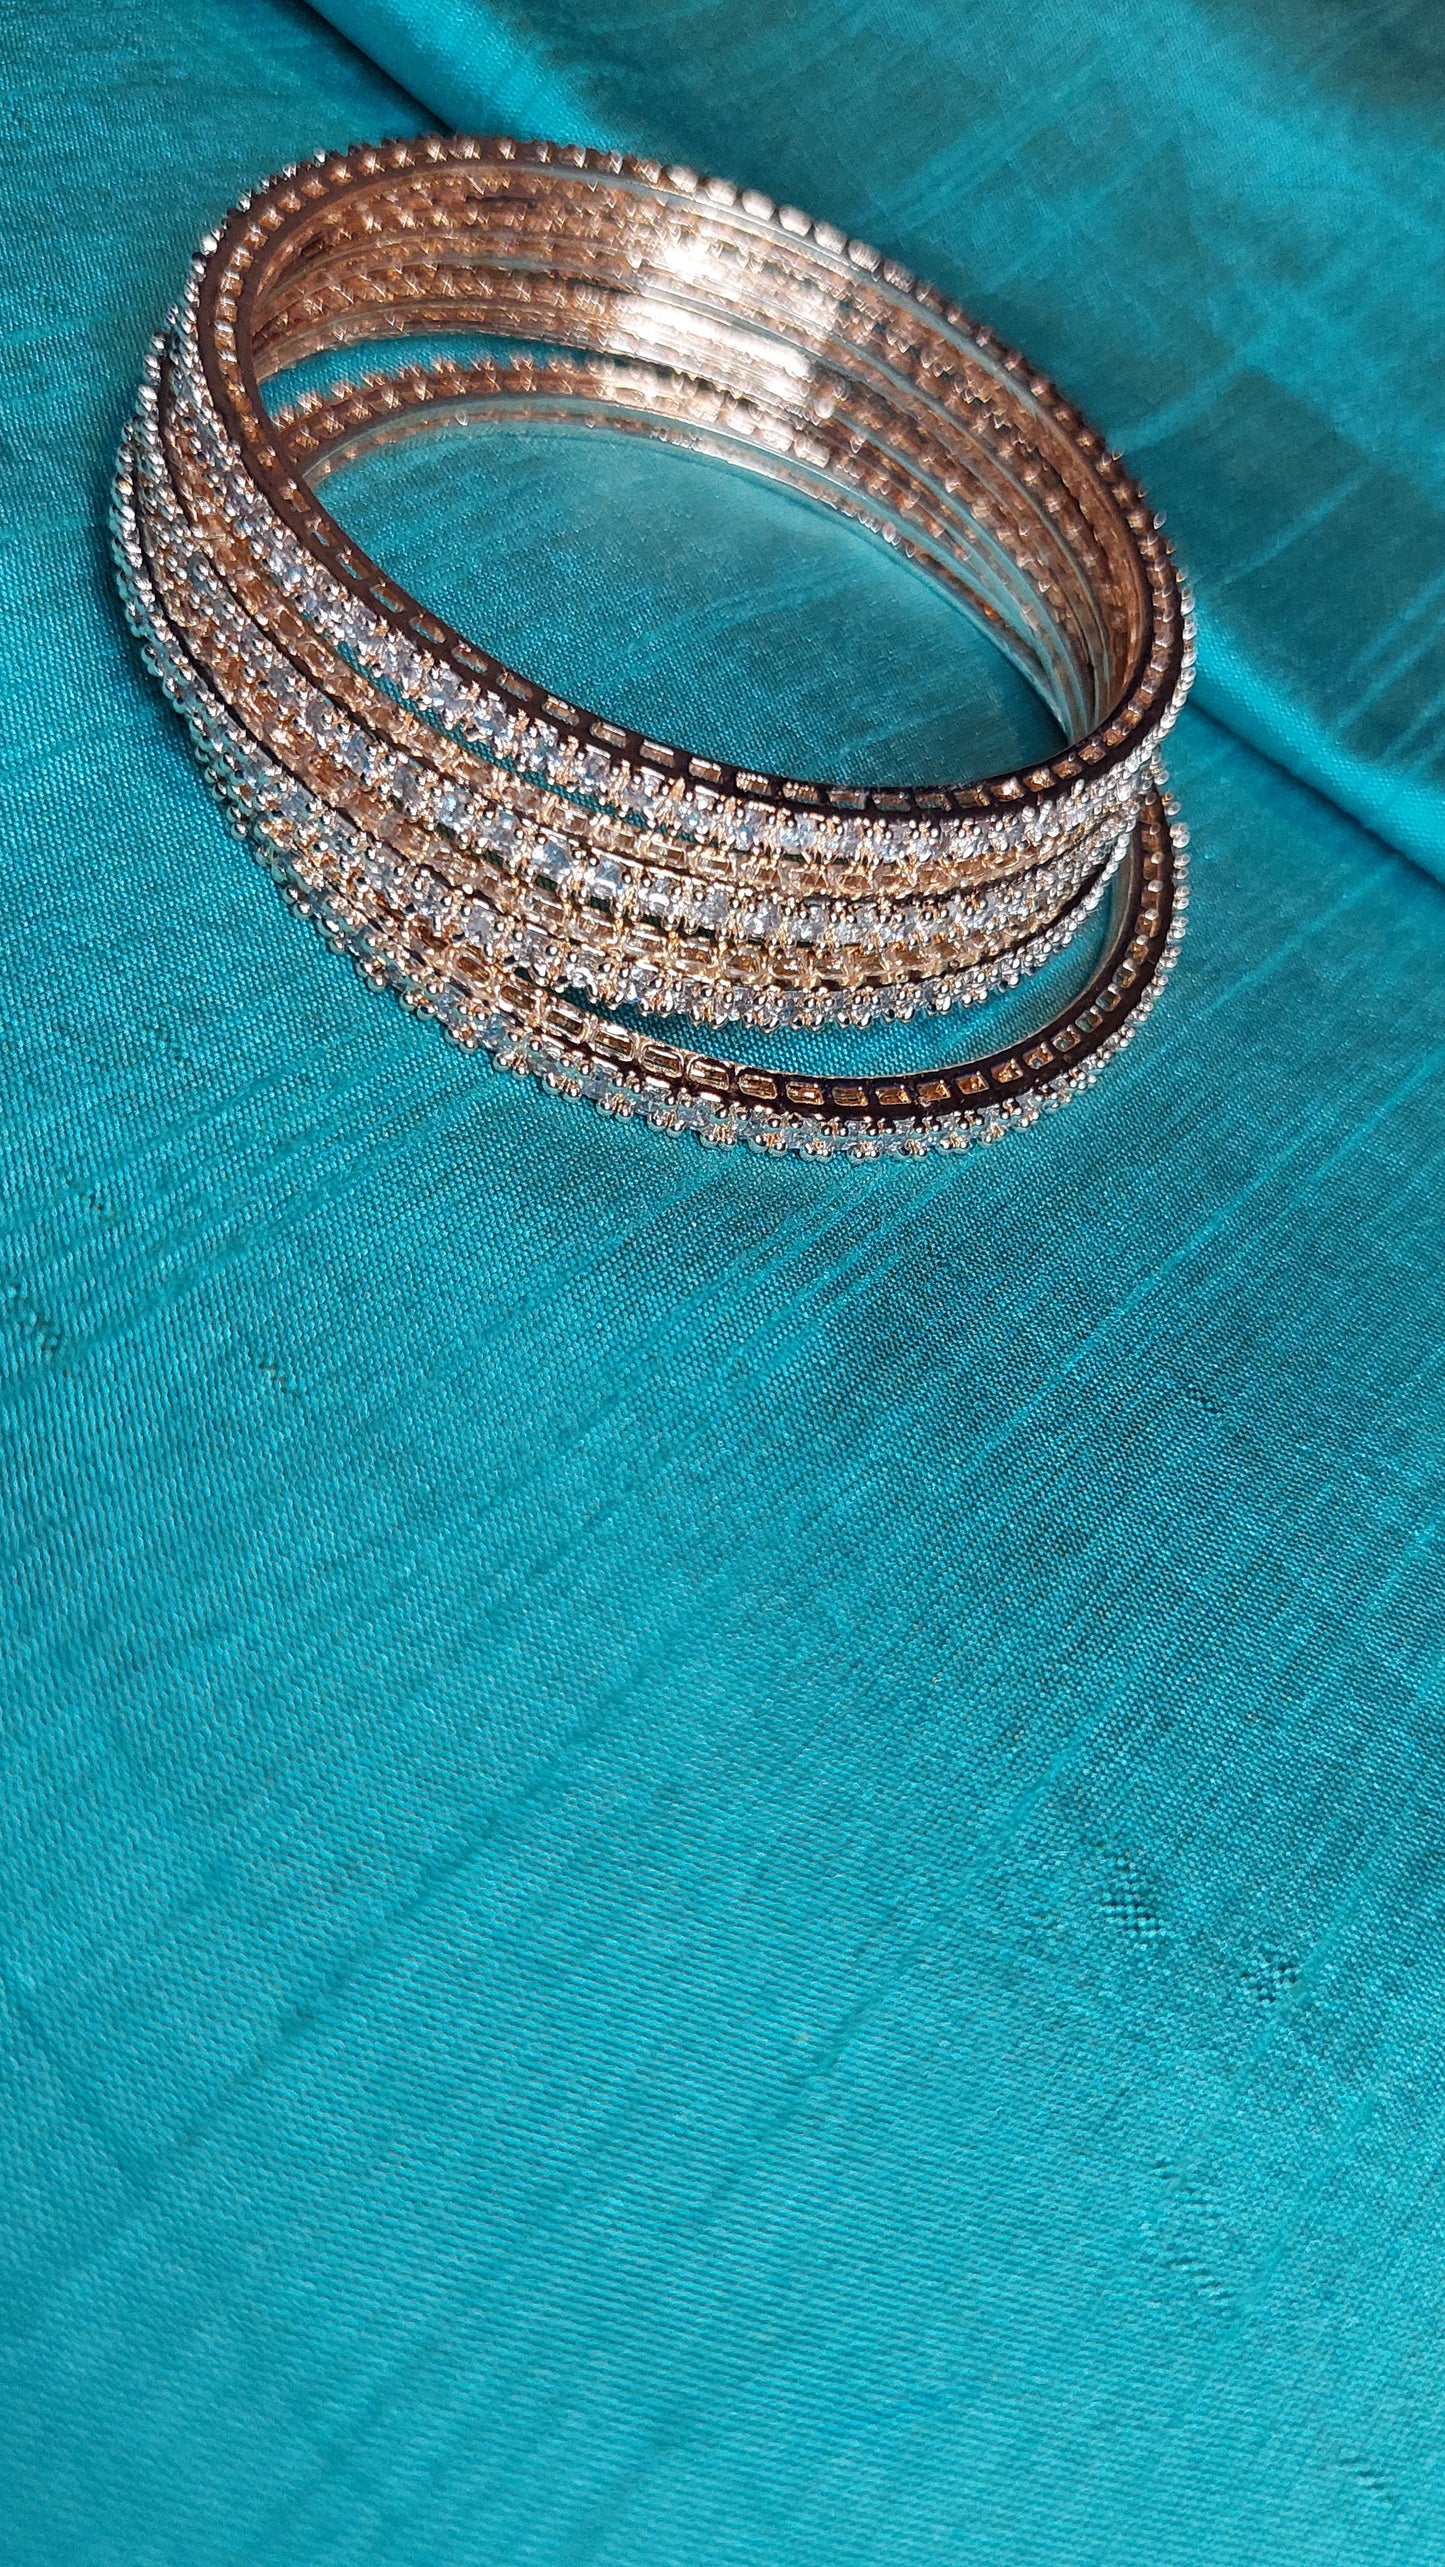 ROSE GOLD A.D. STONE BANGLES